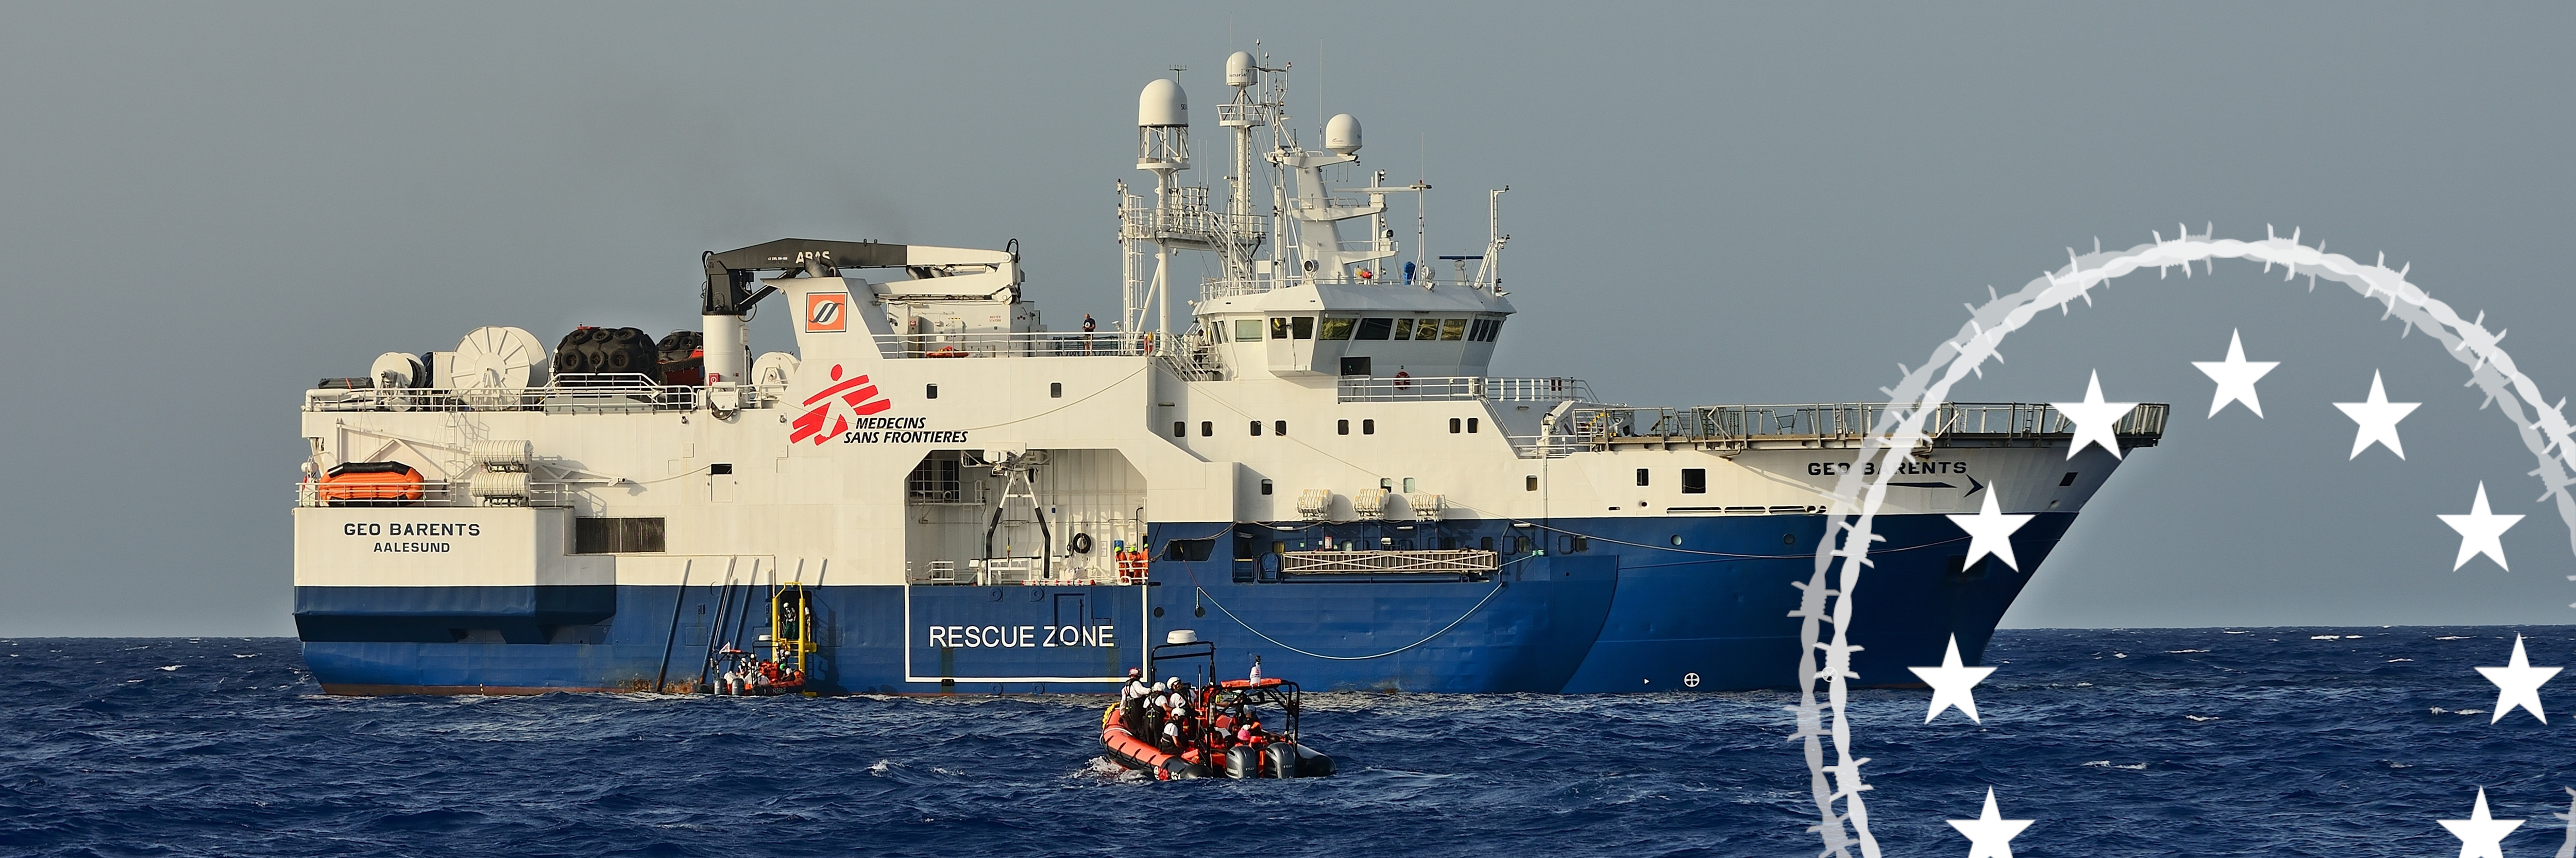 Sea rescue: private sea rescuers from the organisation "Médecins Sans Frontières (MSF)" in the central Mediterranean: the "Geo Barents" chartered as a rescue ship with overlay of the series of articles on the EU asylum reform